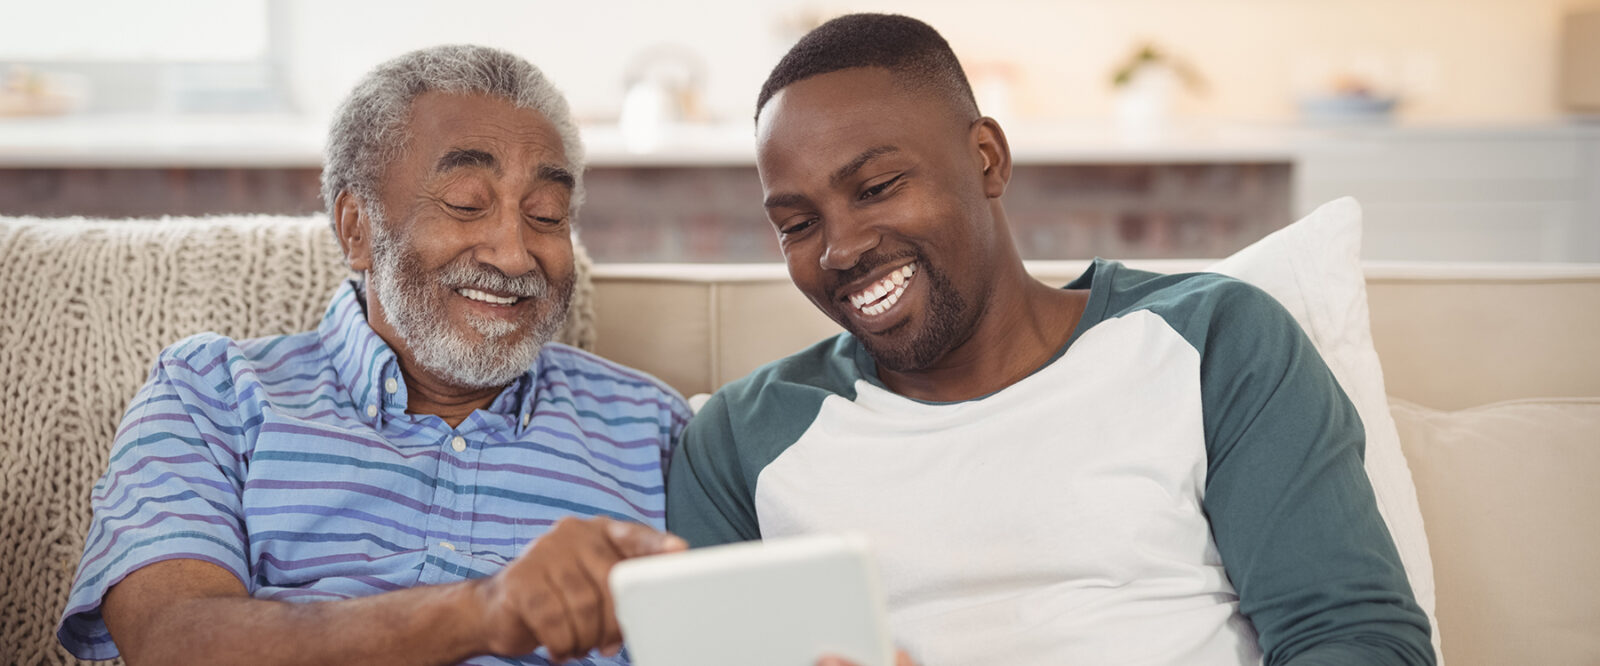 Smiling father and son using digital tablet in living room